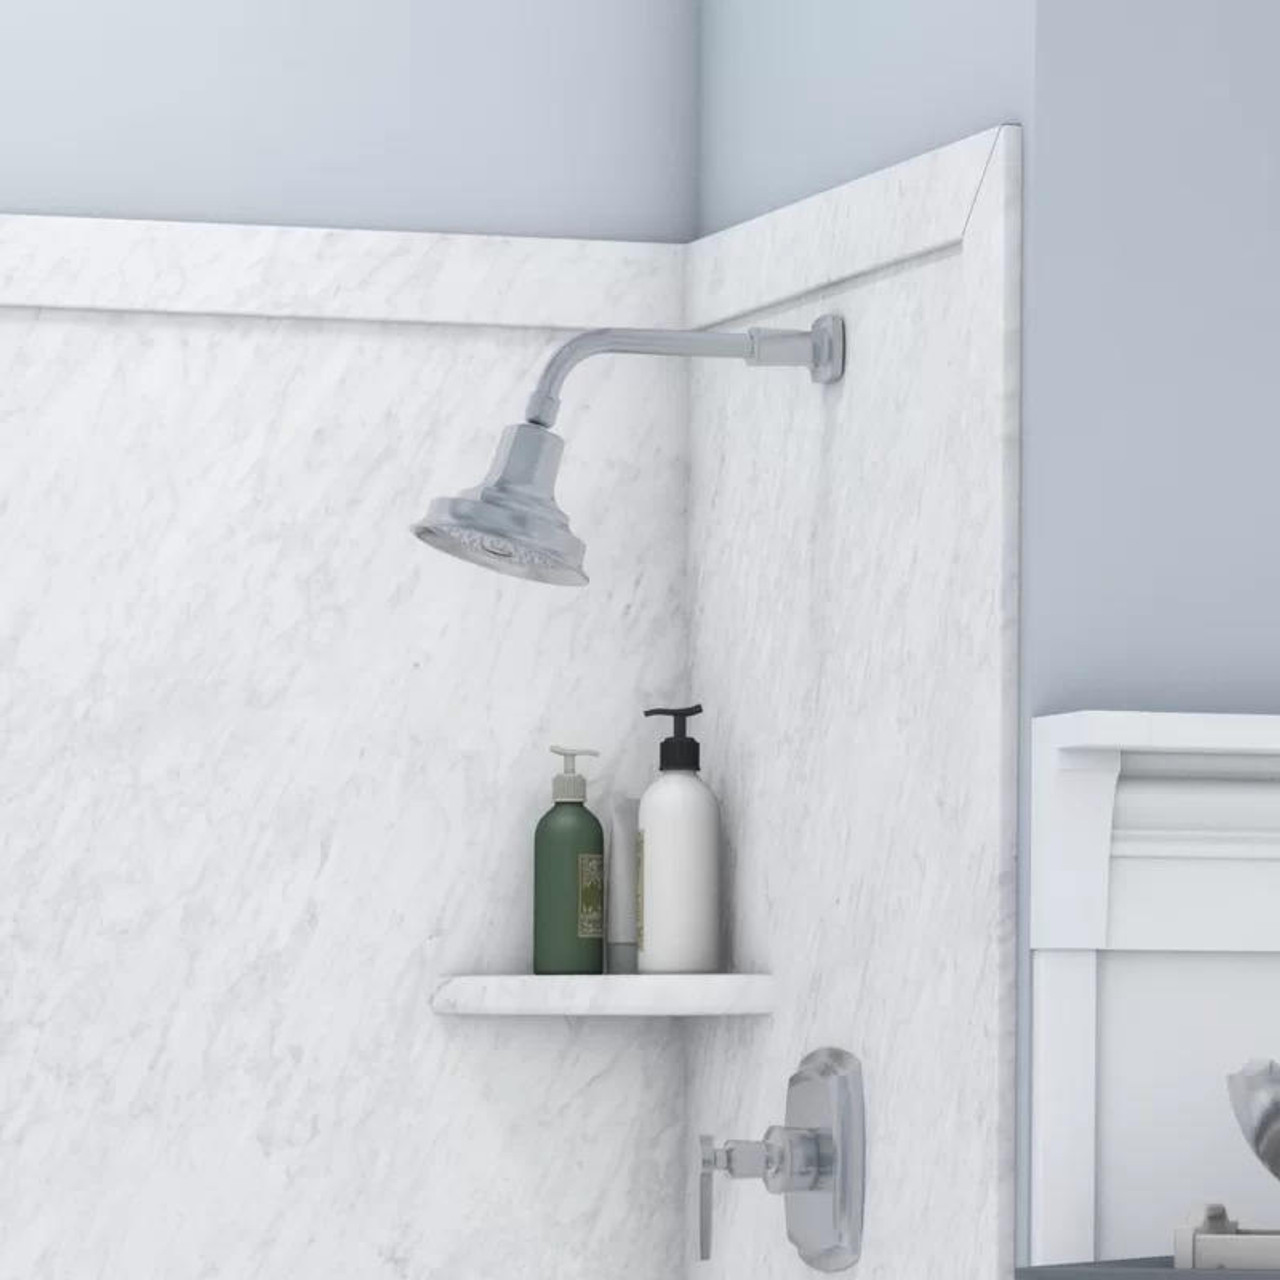 https://cdn11.bigcommerce.com/s-pd8mitkscq/images/stencil/1280x1280/products/1229/2955/flexstone-corner-shelf-for-bathtub-and-shower-wall-surround-kits-frost-carrera-marble__58666.1643647399.jpg?c=1